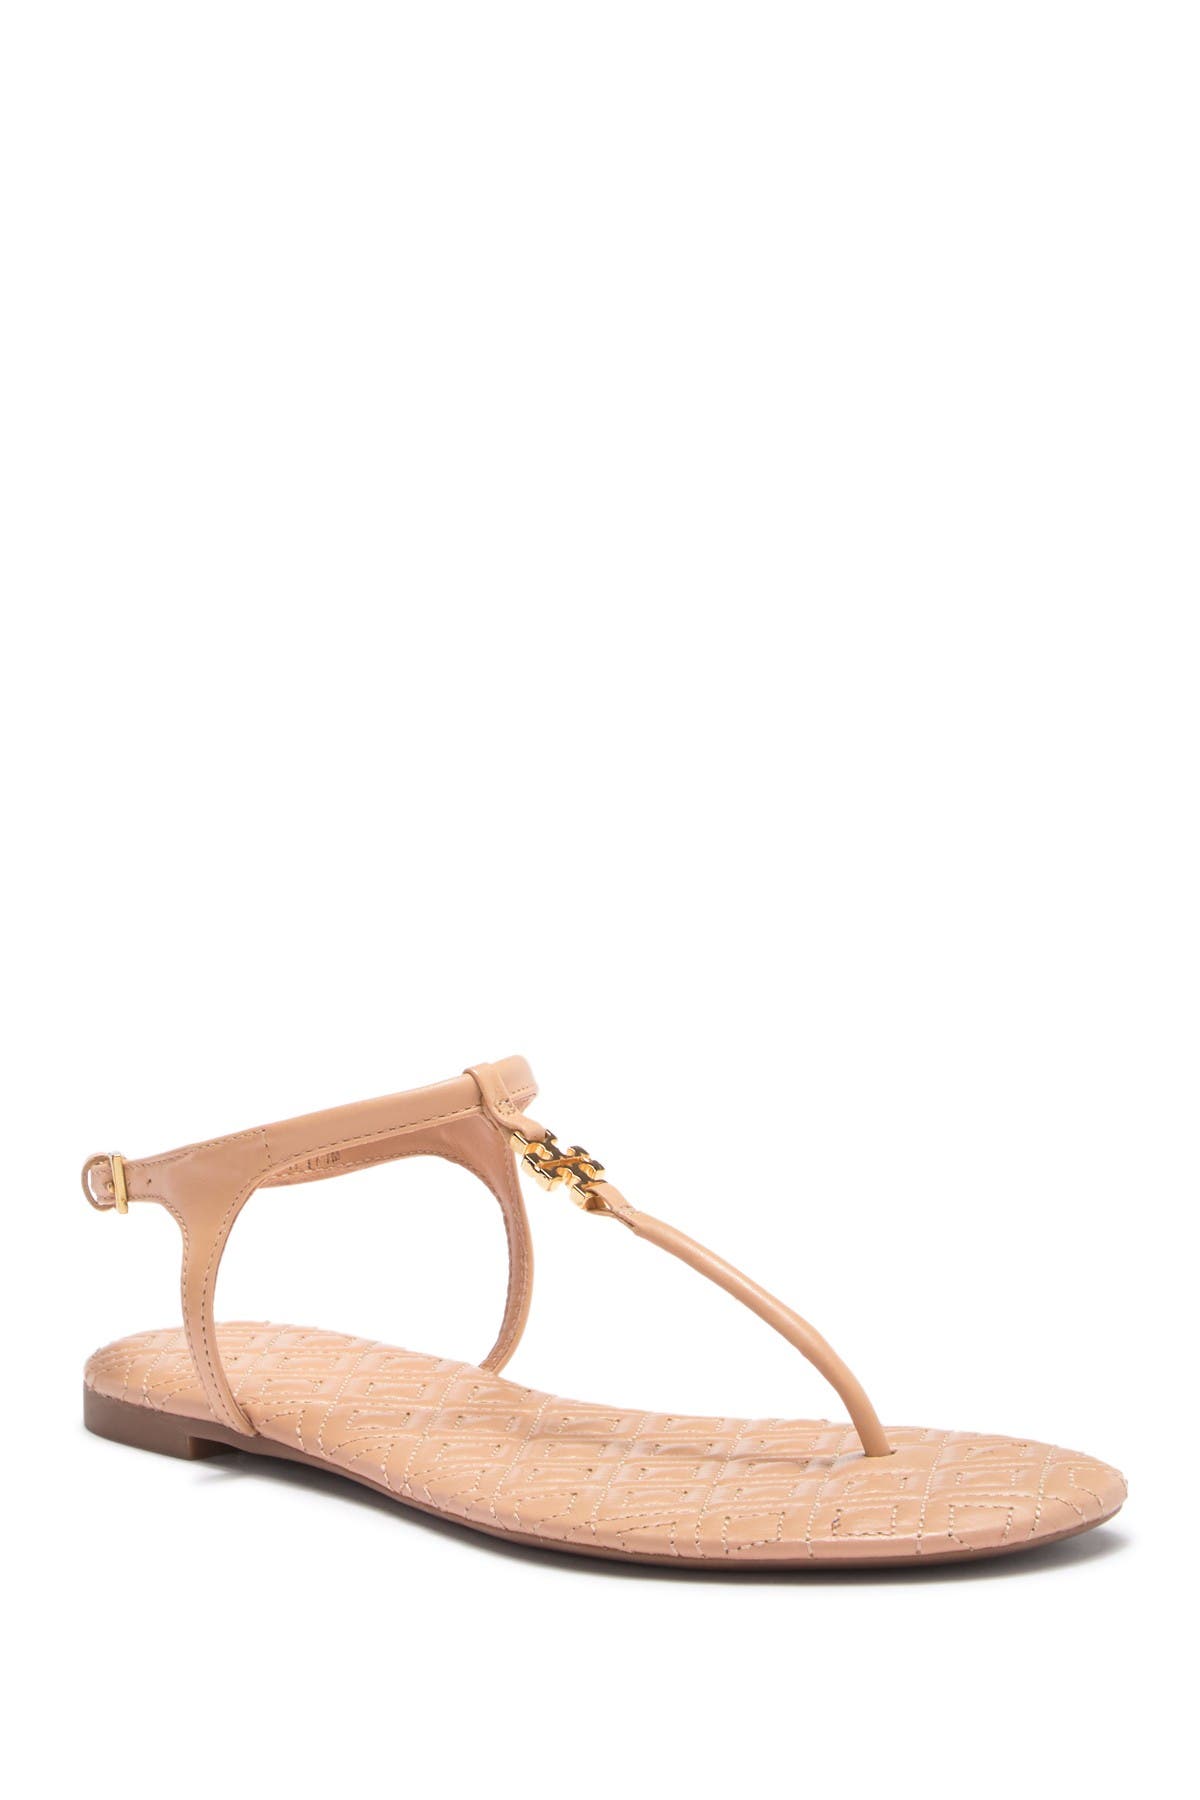 tory burch marion quilted sandal